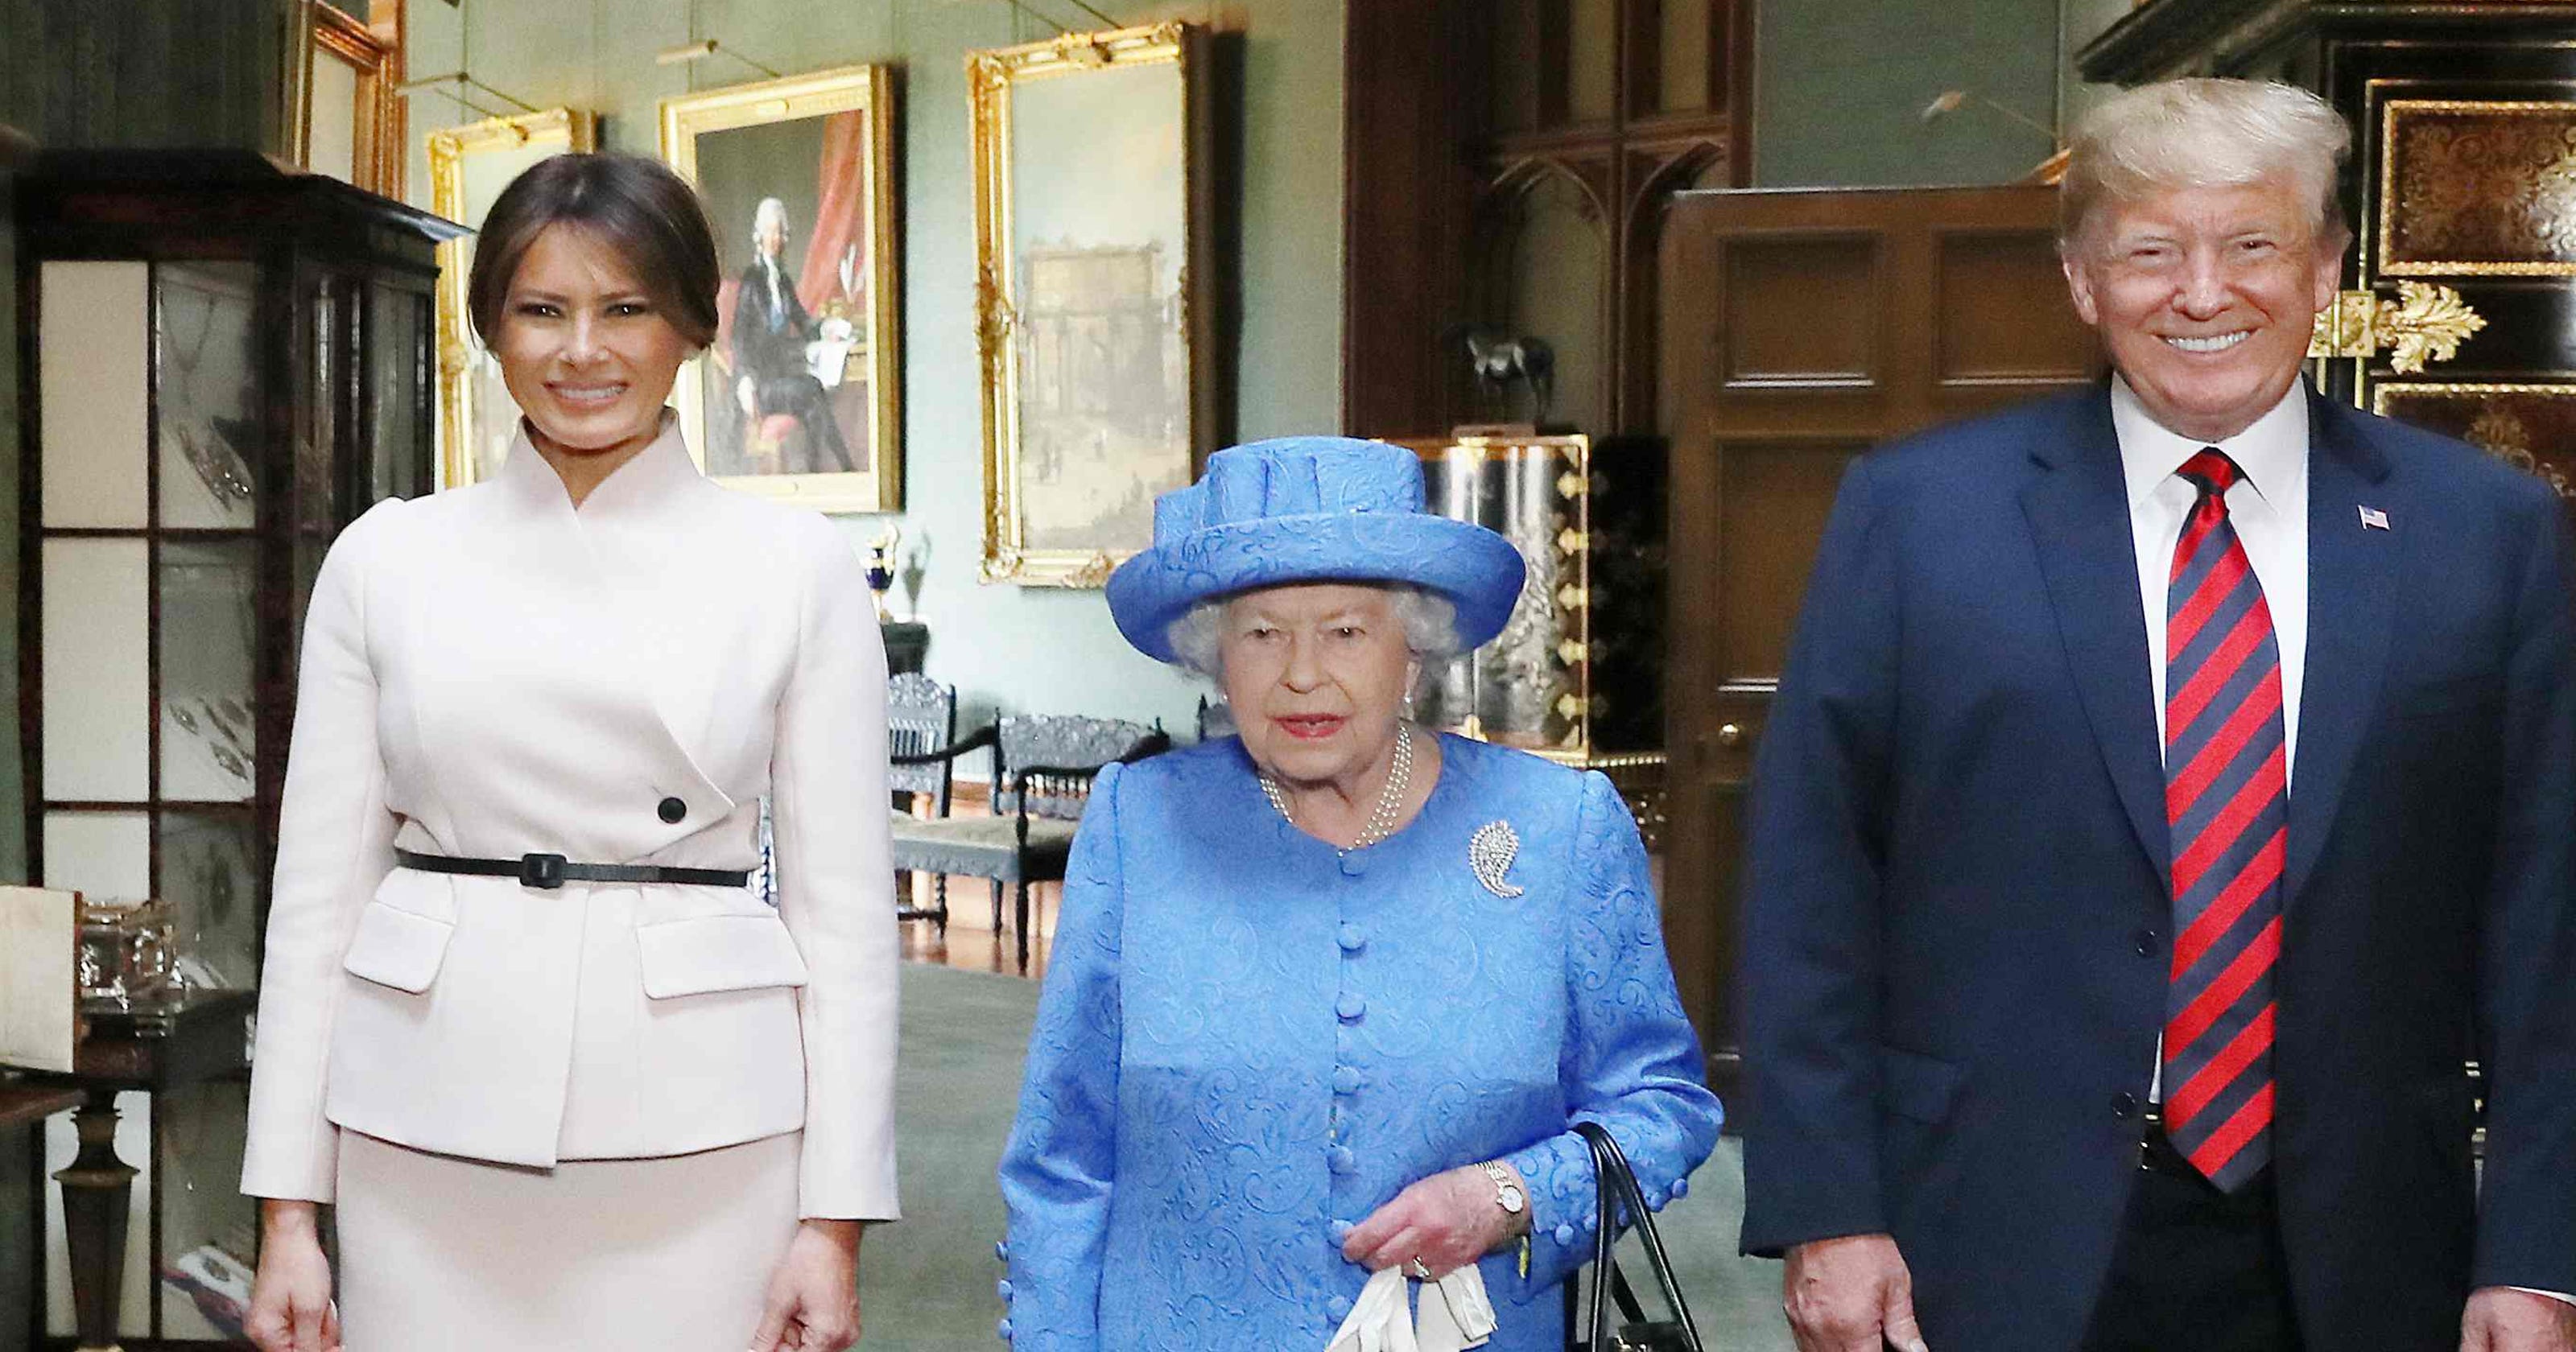 What Trump Is Still Getting Wrong About His Meeting With The Queen